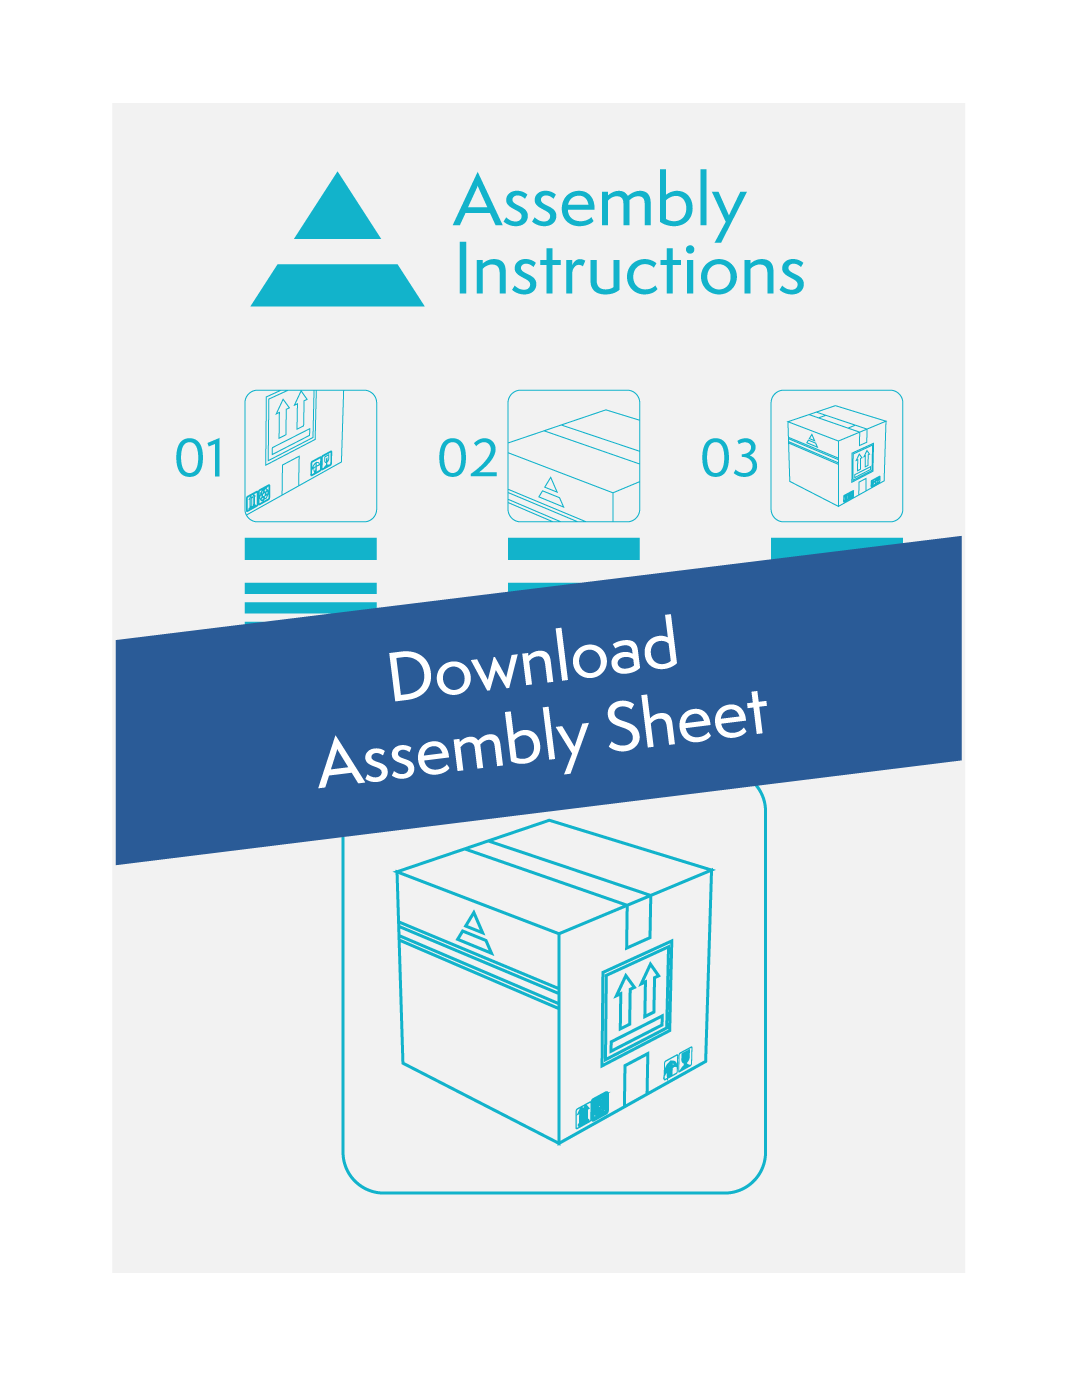 Download Assembly Sheet